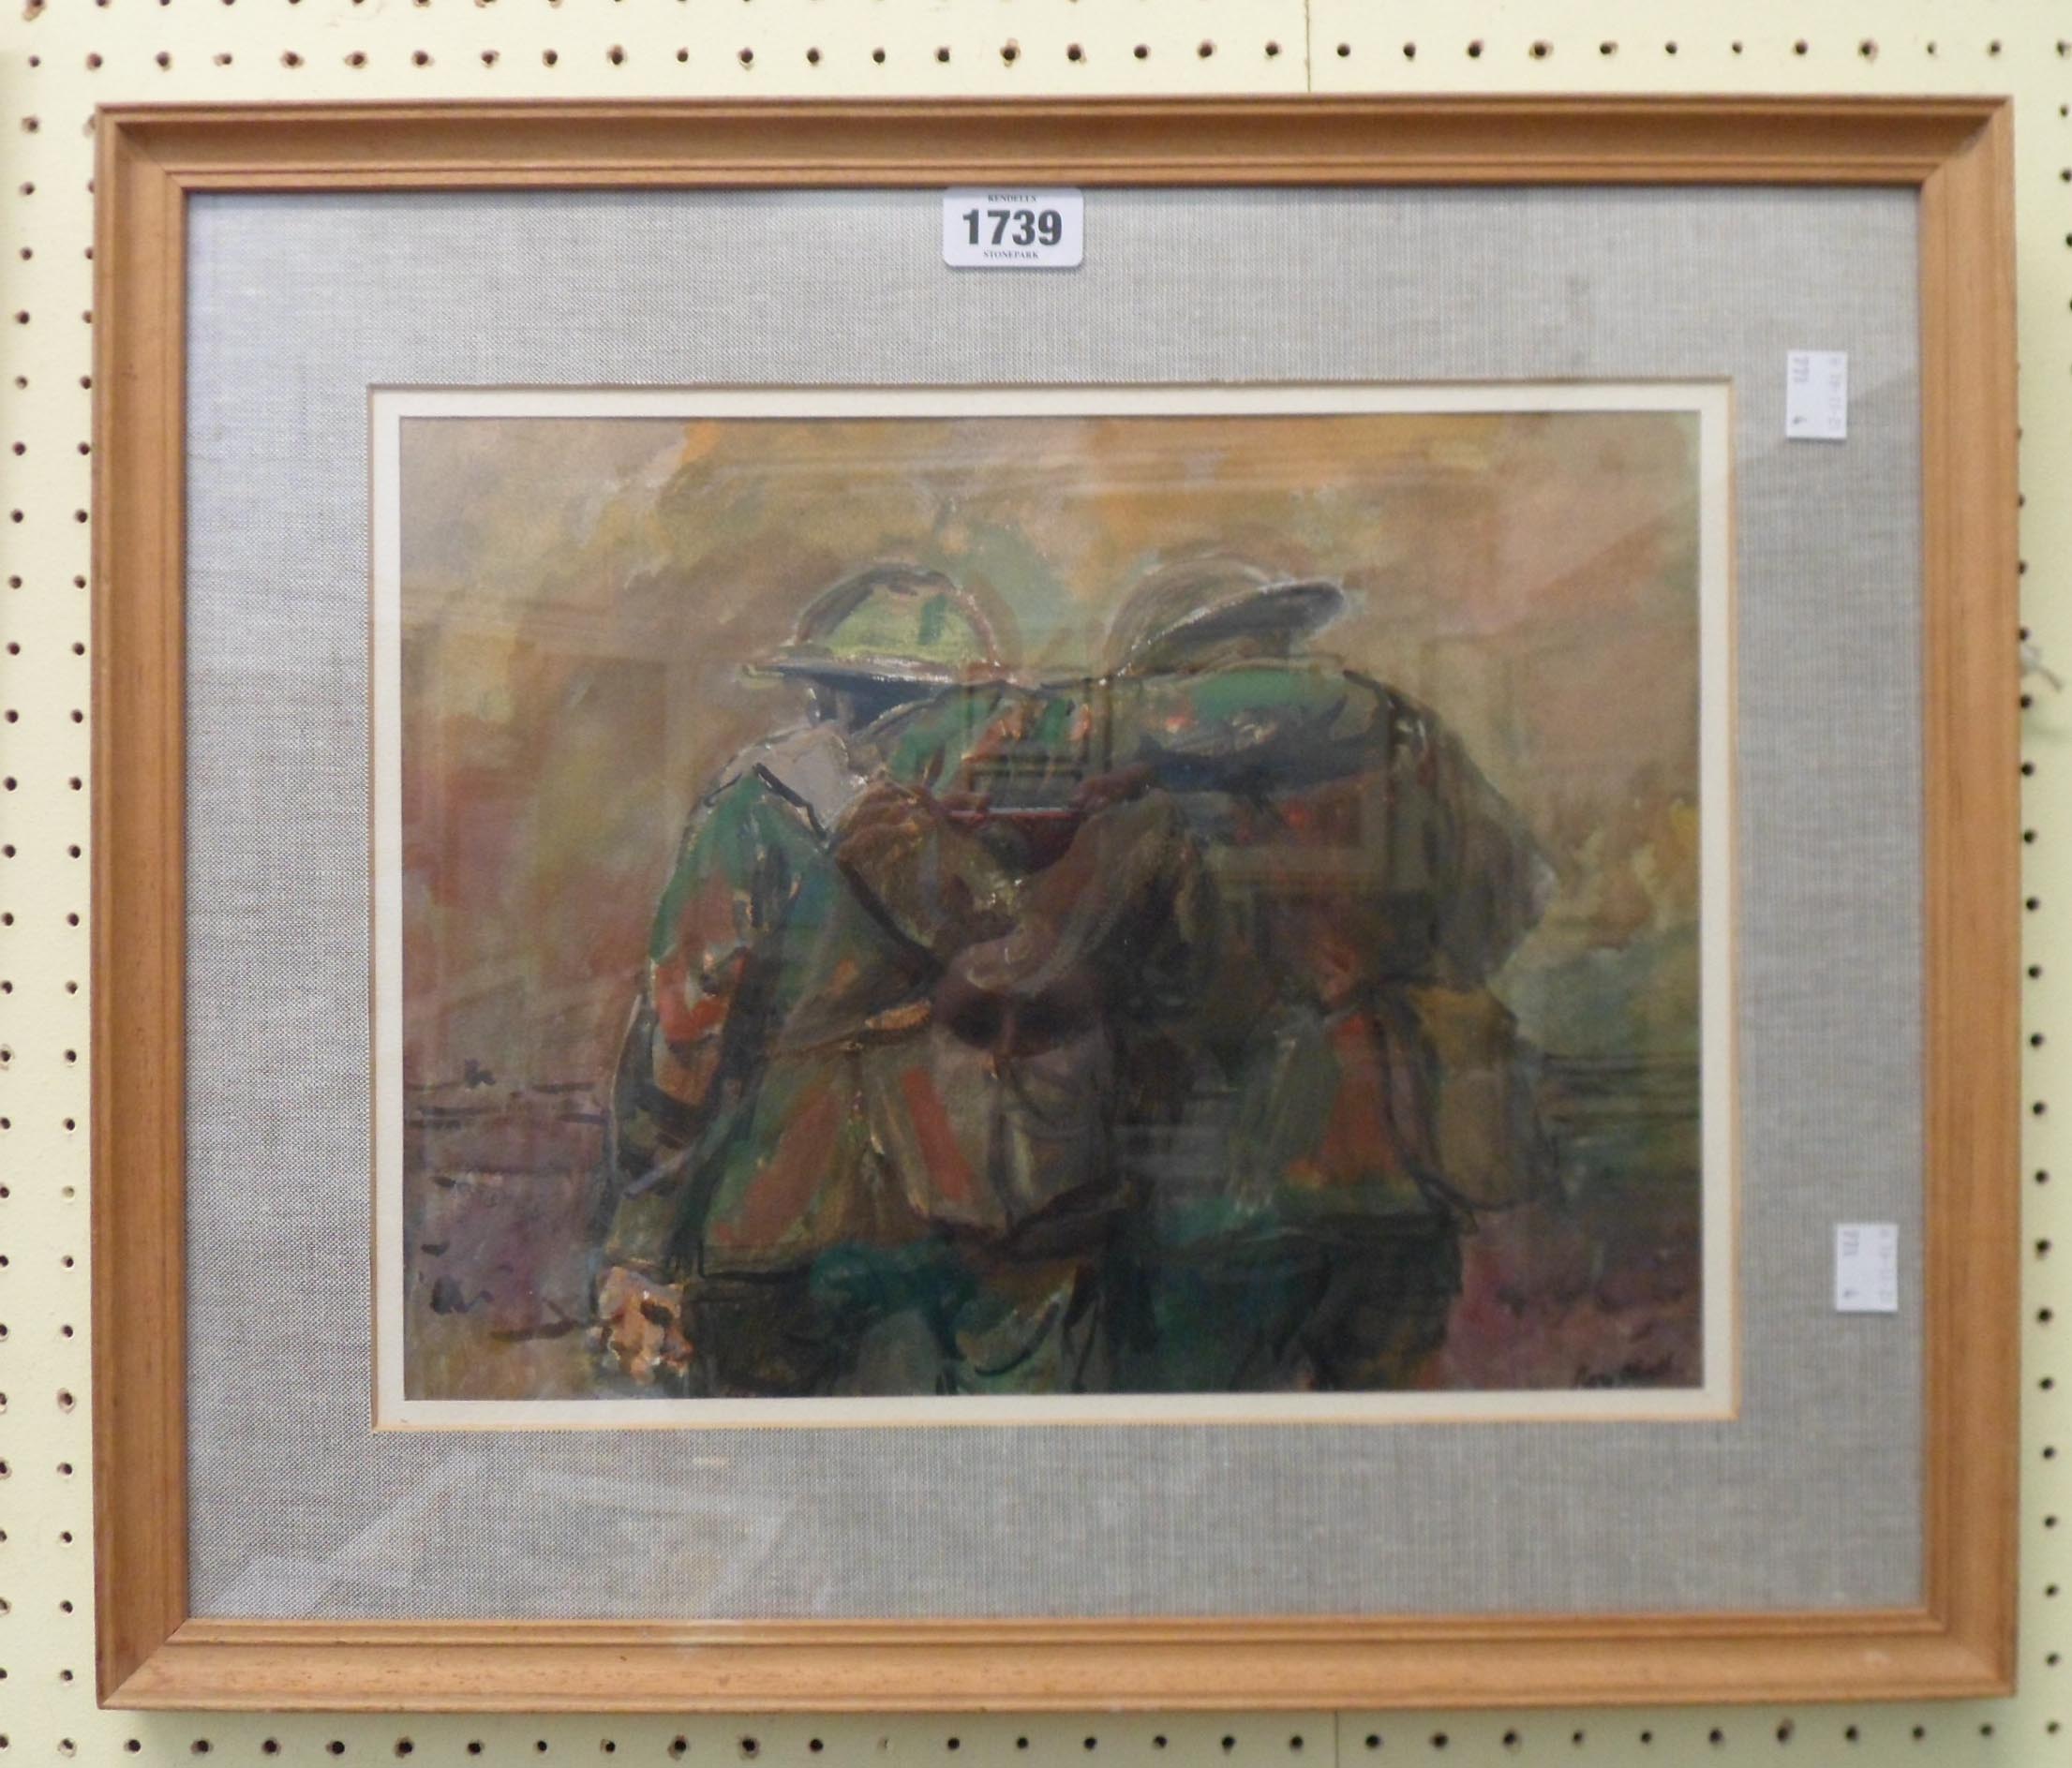 A framed watercolour, depicting brothers in arms - indistinctly signed Roy .....